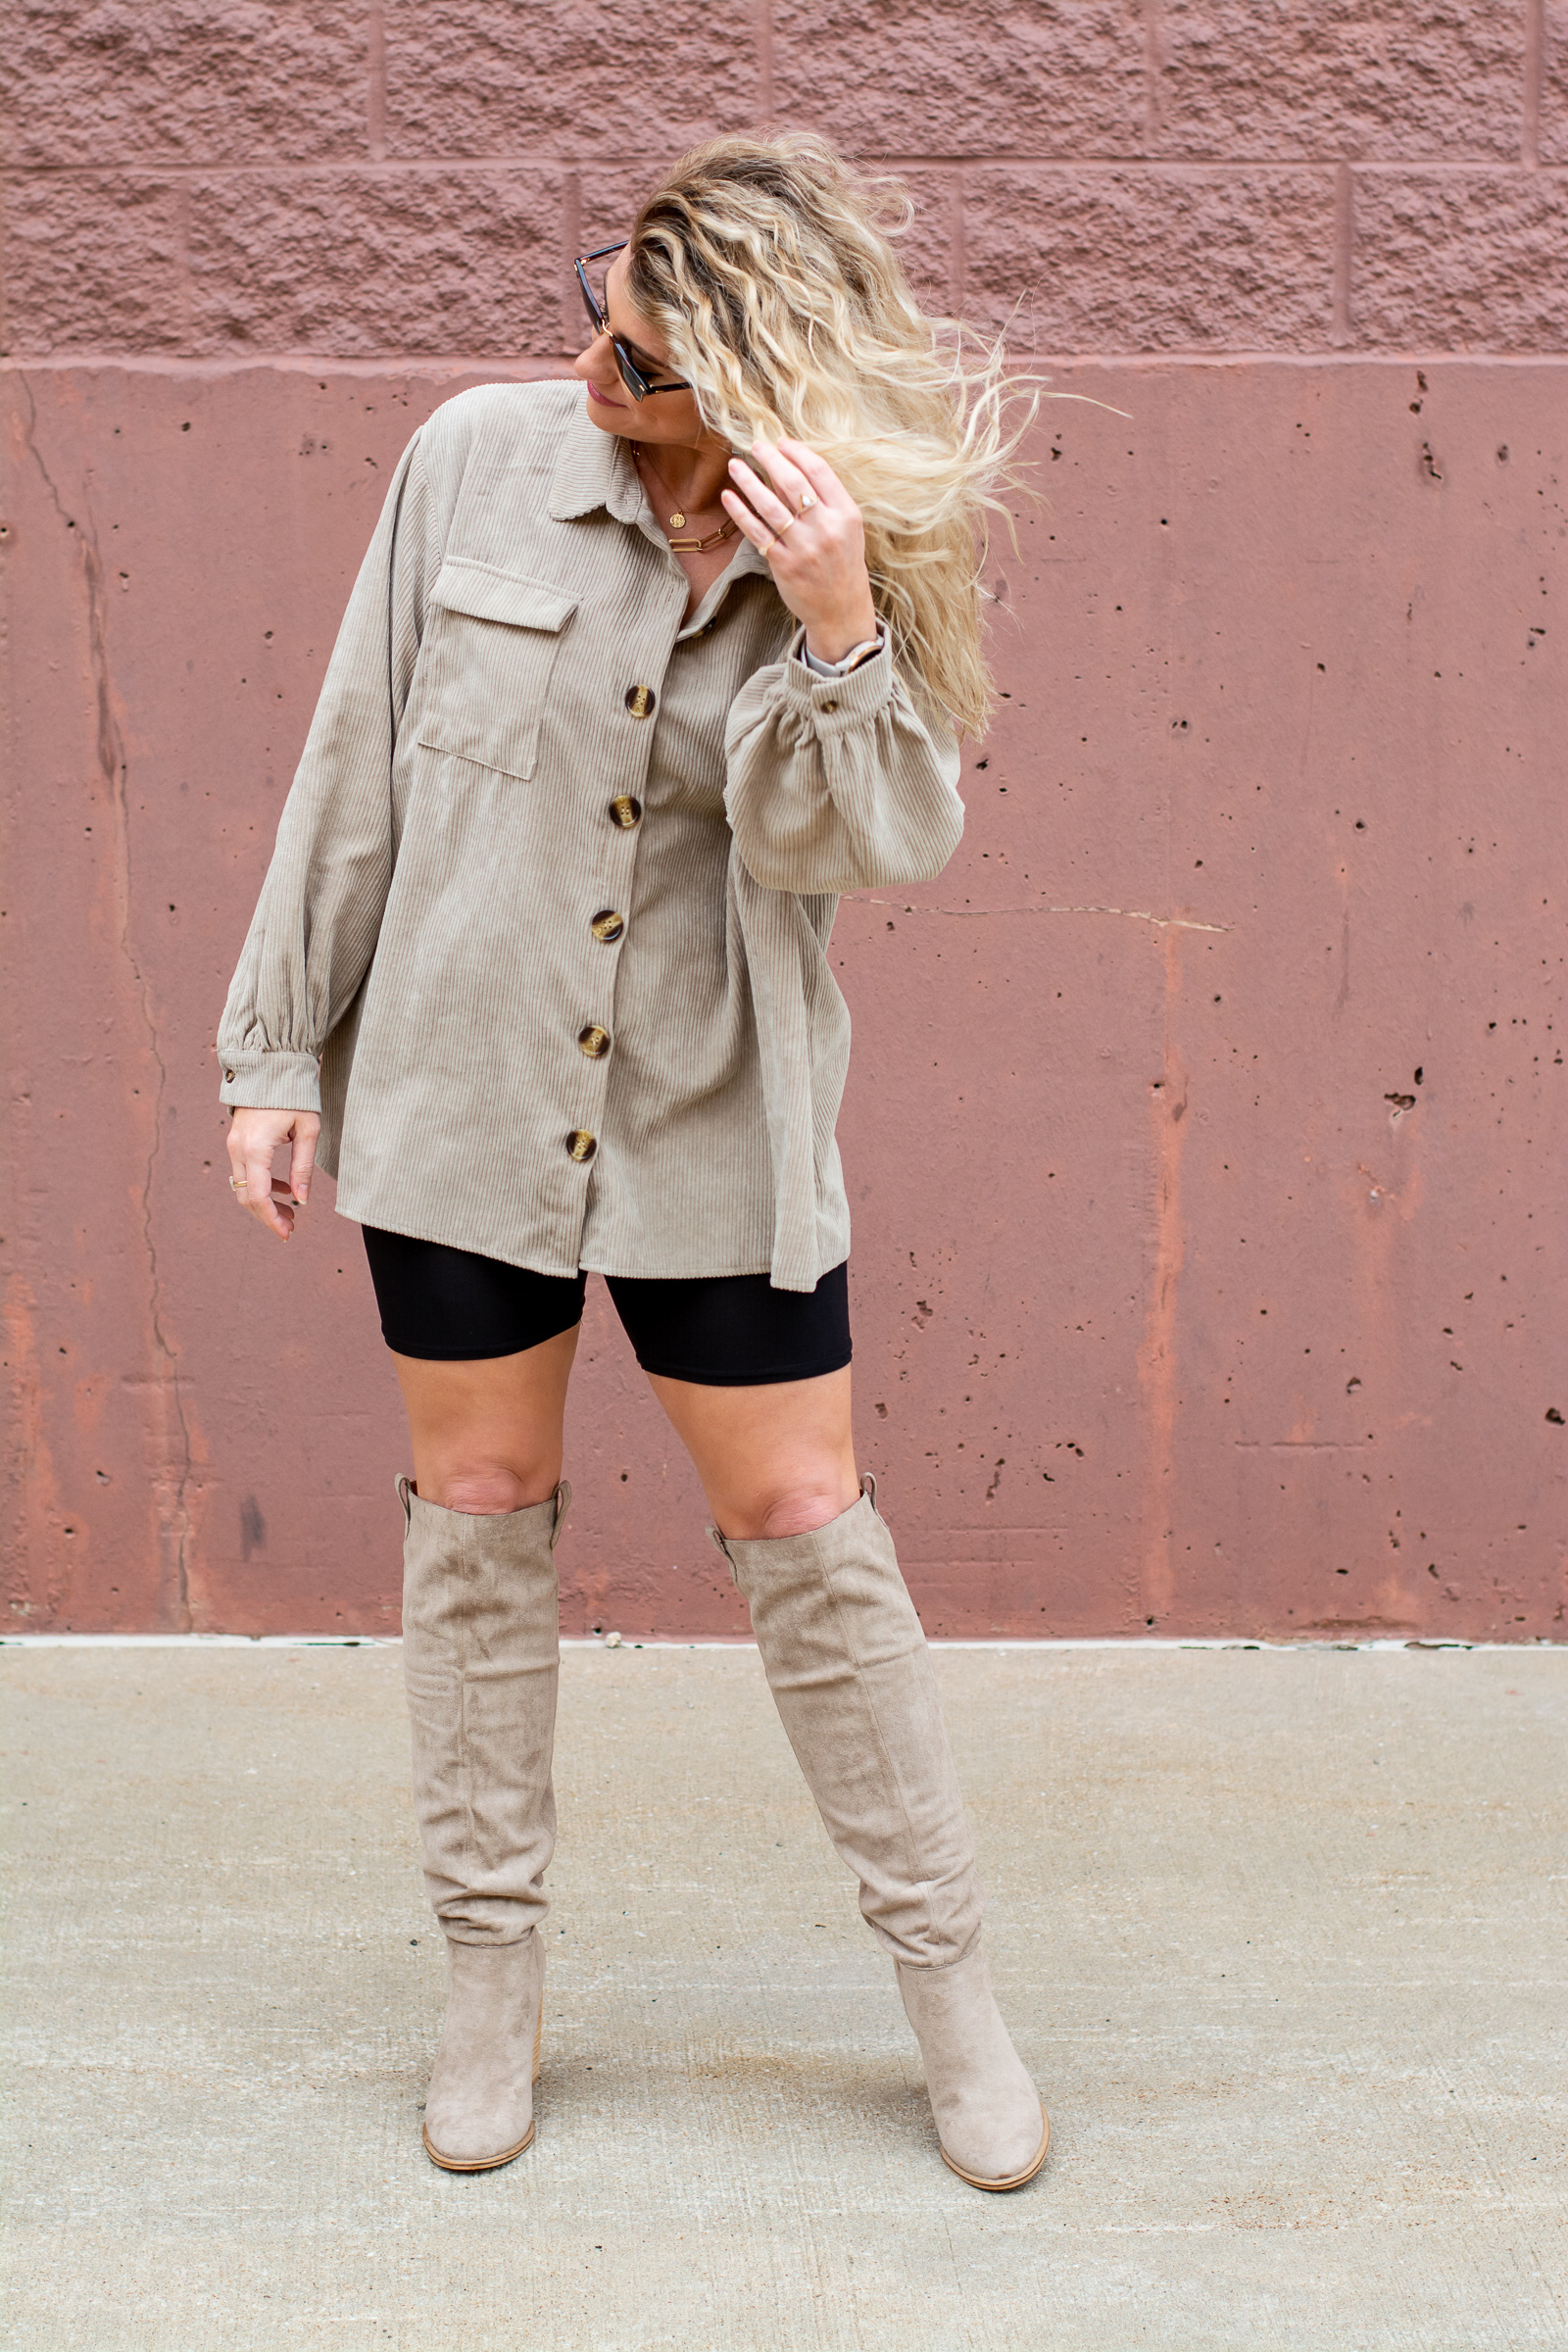 Summer to Fall Outfit: Oversized Corduroy Shirt + Tall Boots. | LSR